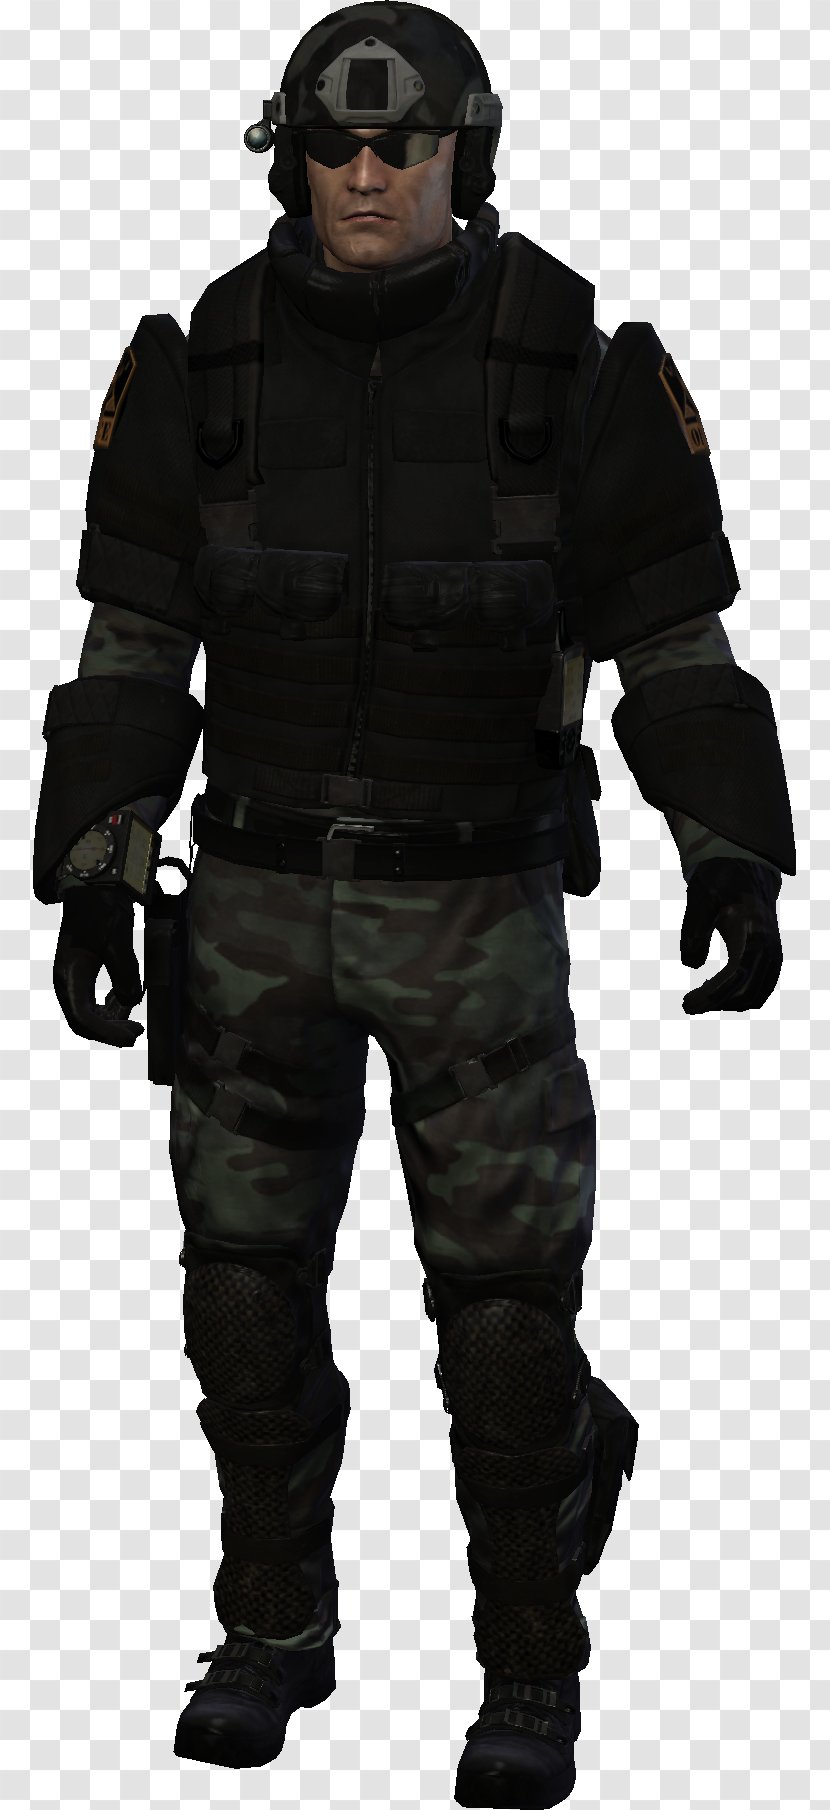 Hitman: Absolution Codename 47 Contracts Blood Money - Body Armor - Hitman Transparent PNG